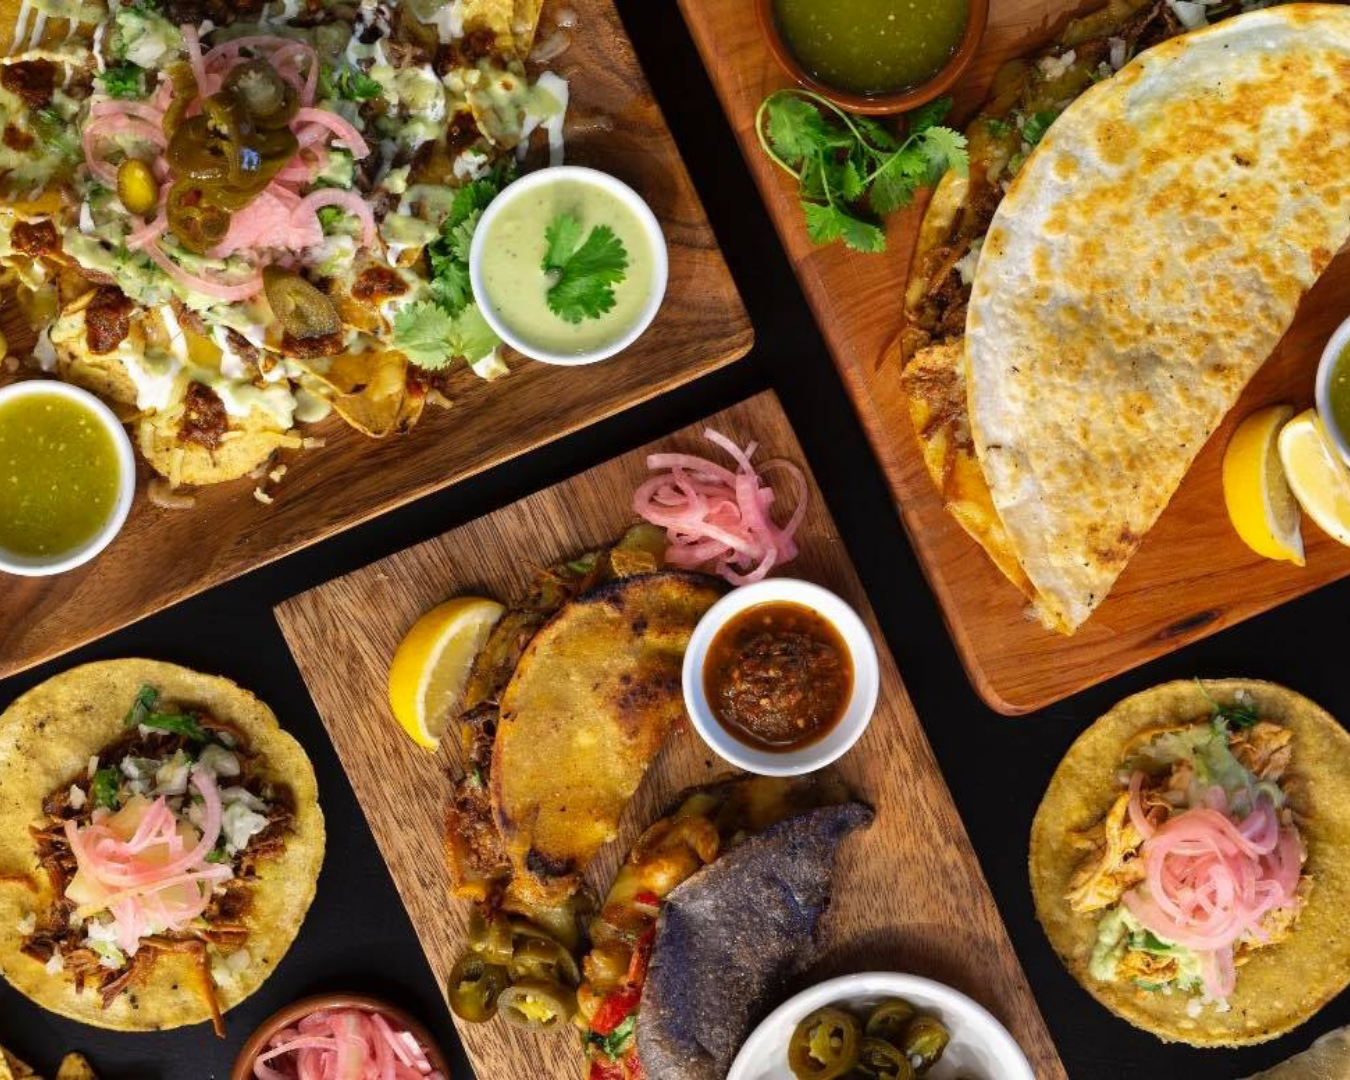 A range of dishes including Birria Tacos, Quesadillas and other tacos along with sauces and sides